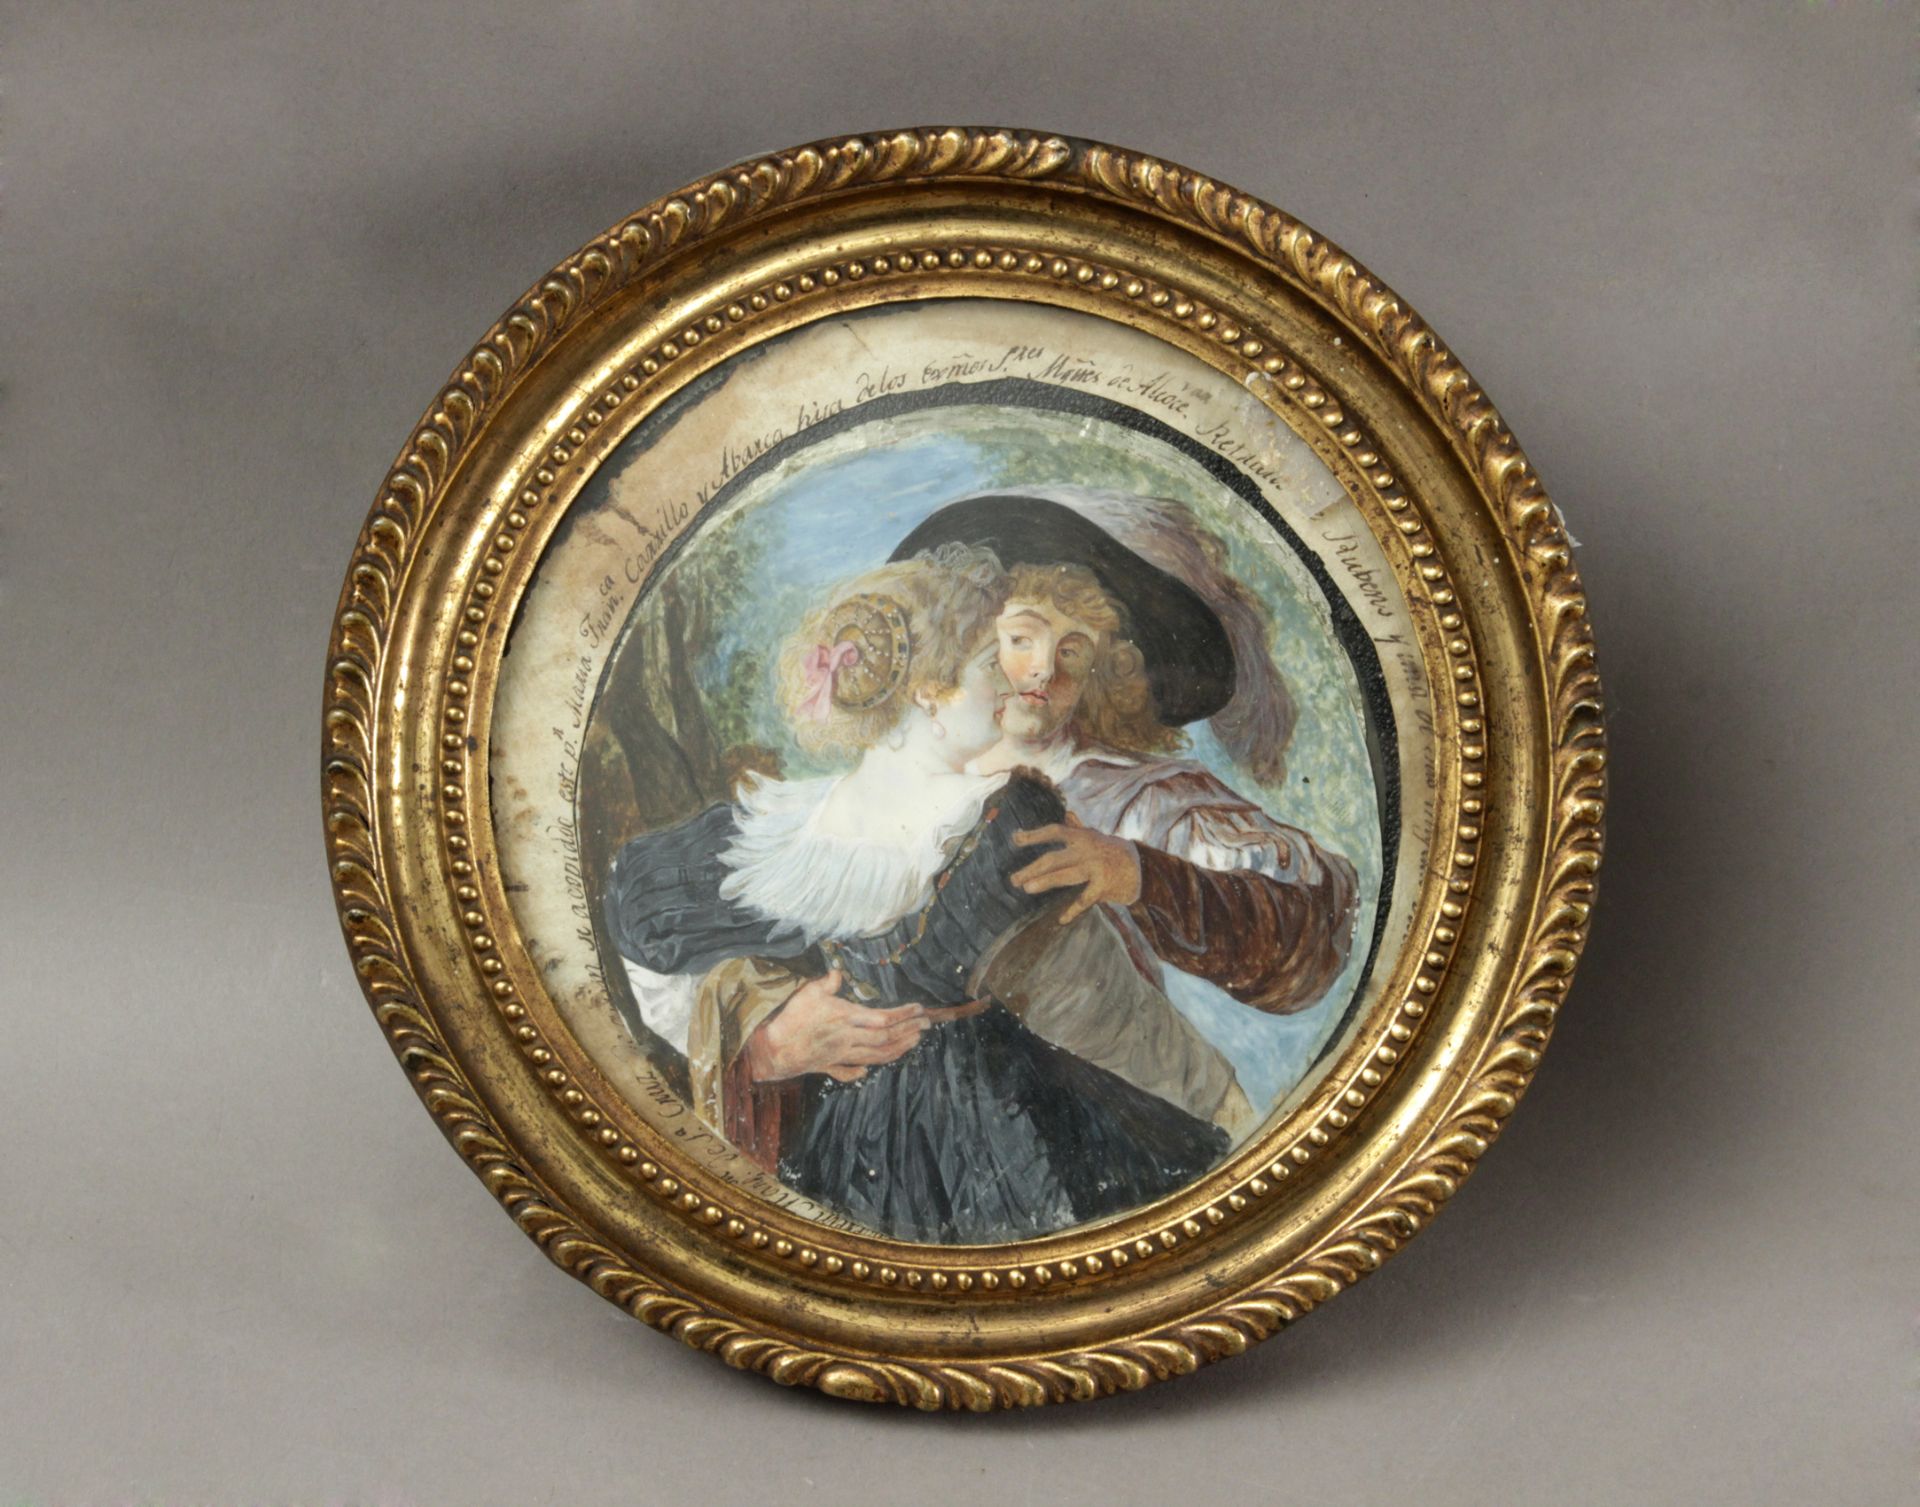 19th century Spanish portrait miniature depicting "Rubens with one of his spouses"